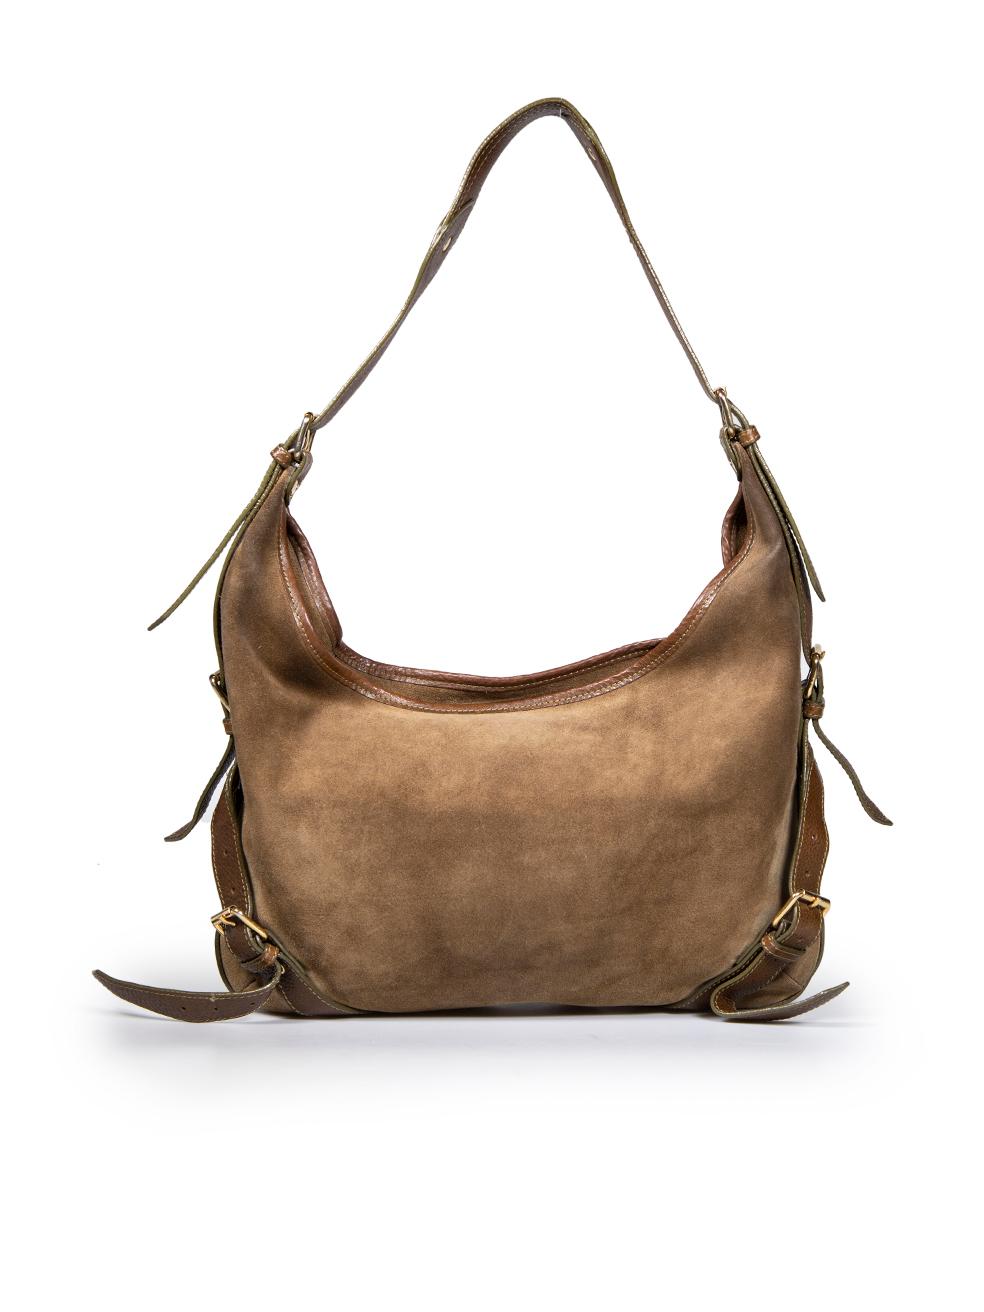 Burberry Khaki Suede Hobo Shoulder Bag In Good Condition For Sale In London, GB